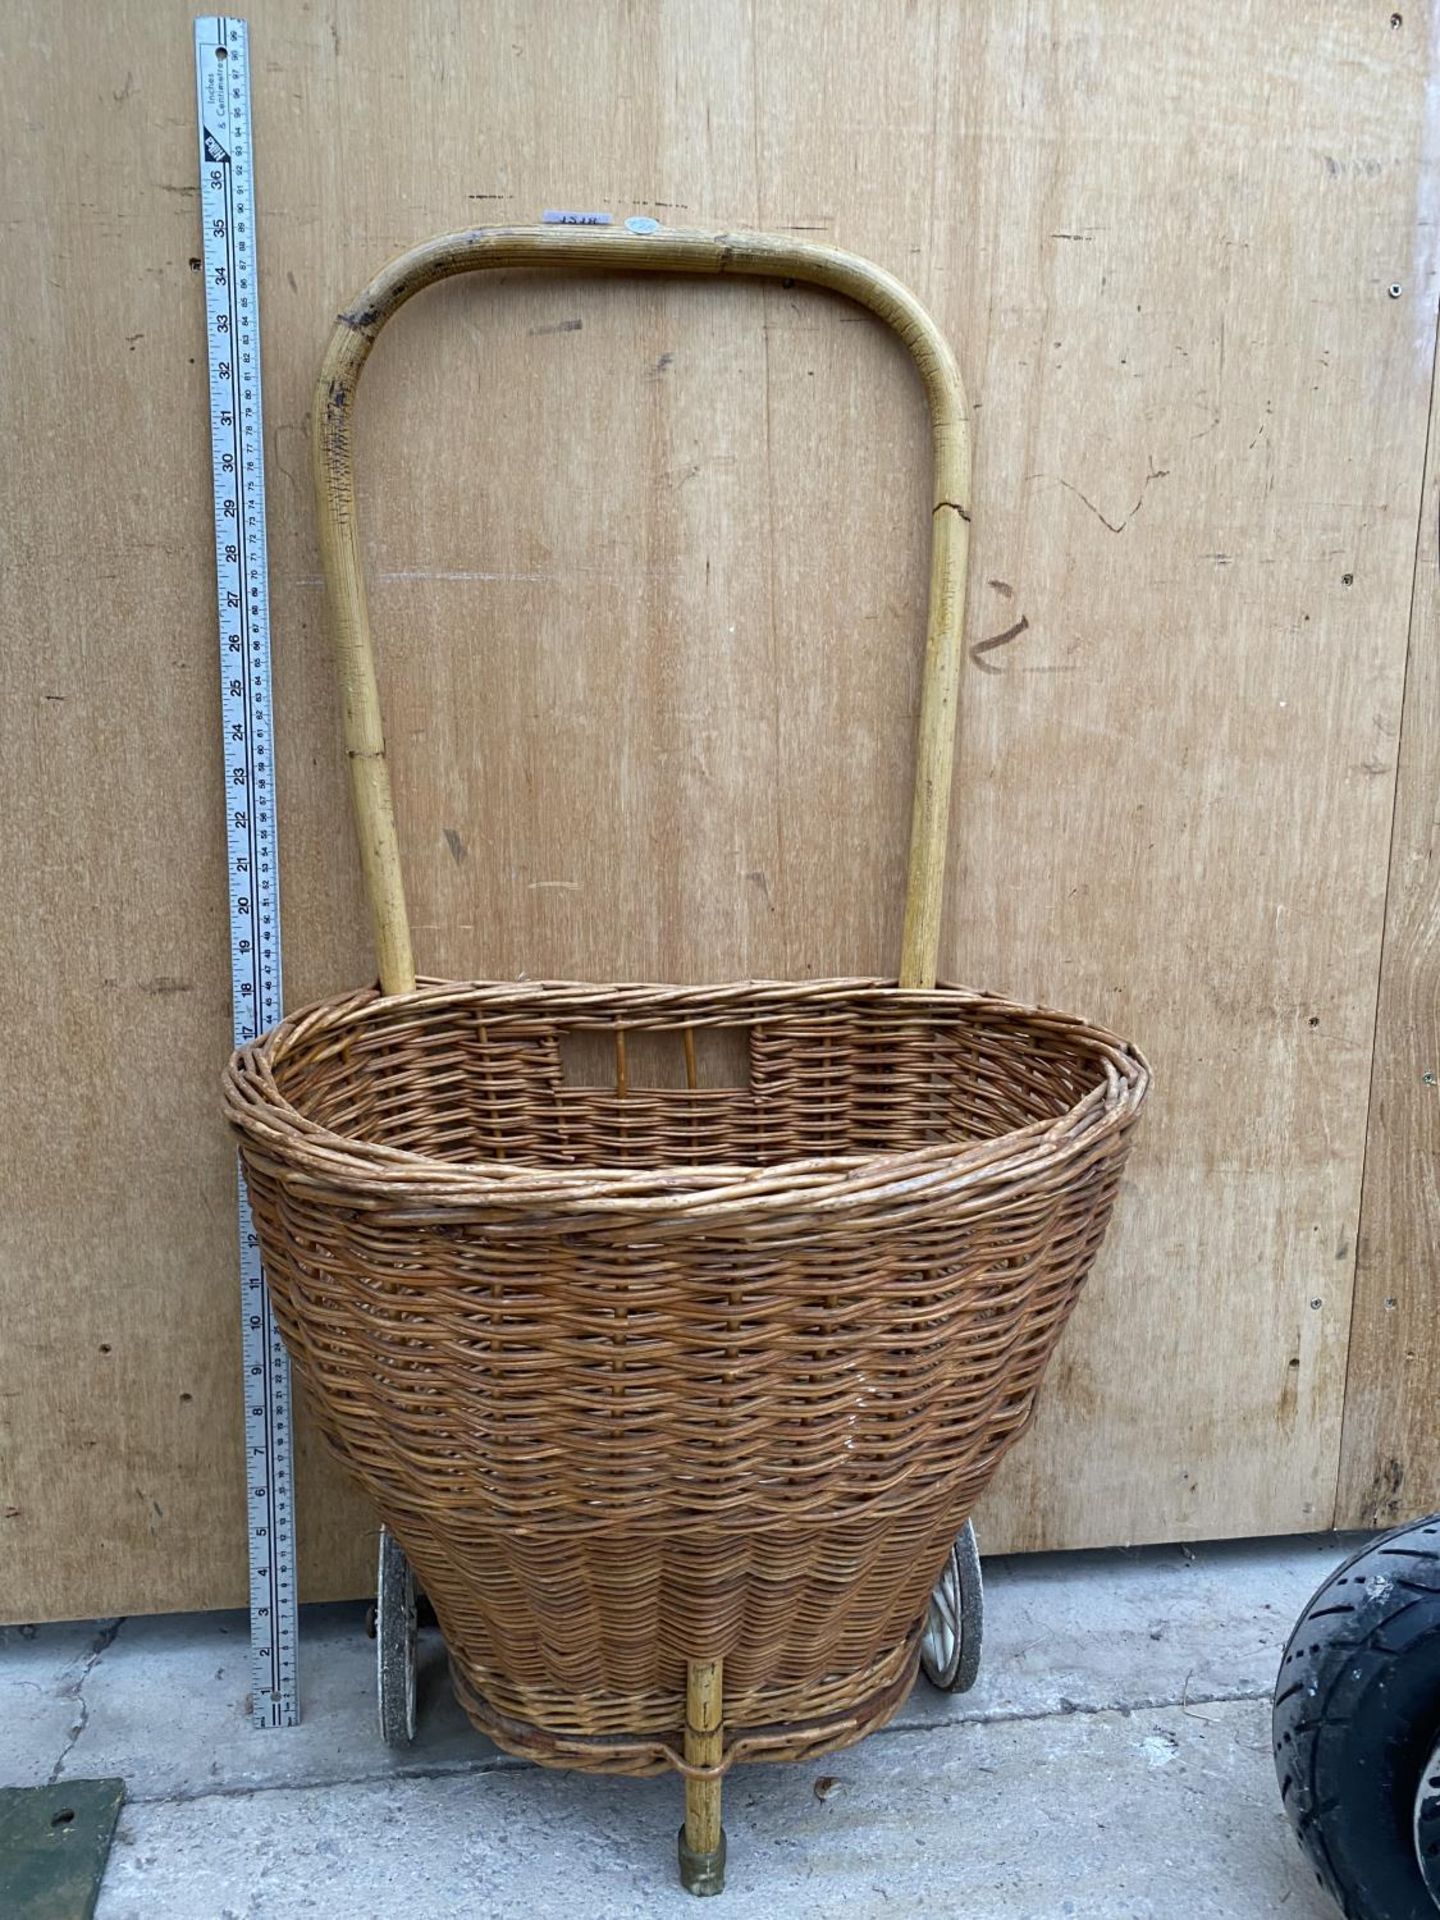 A VINTAGE 1950'S WICKER SHOPPING BASKET - Image 5 of 5